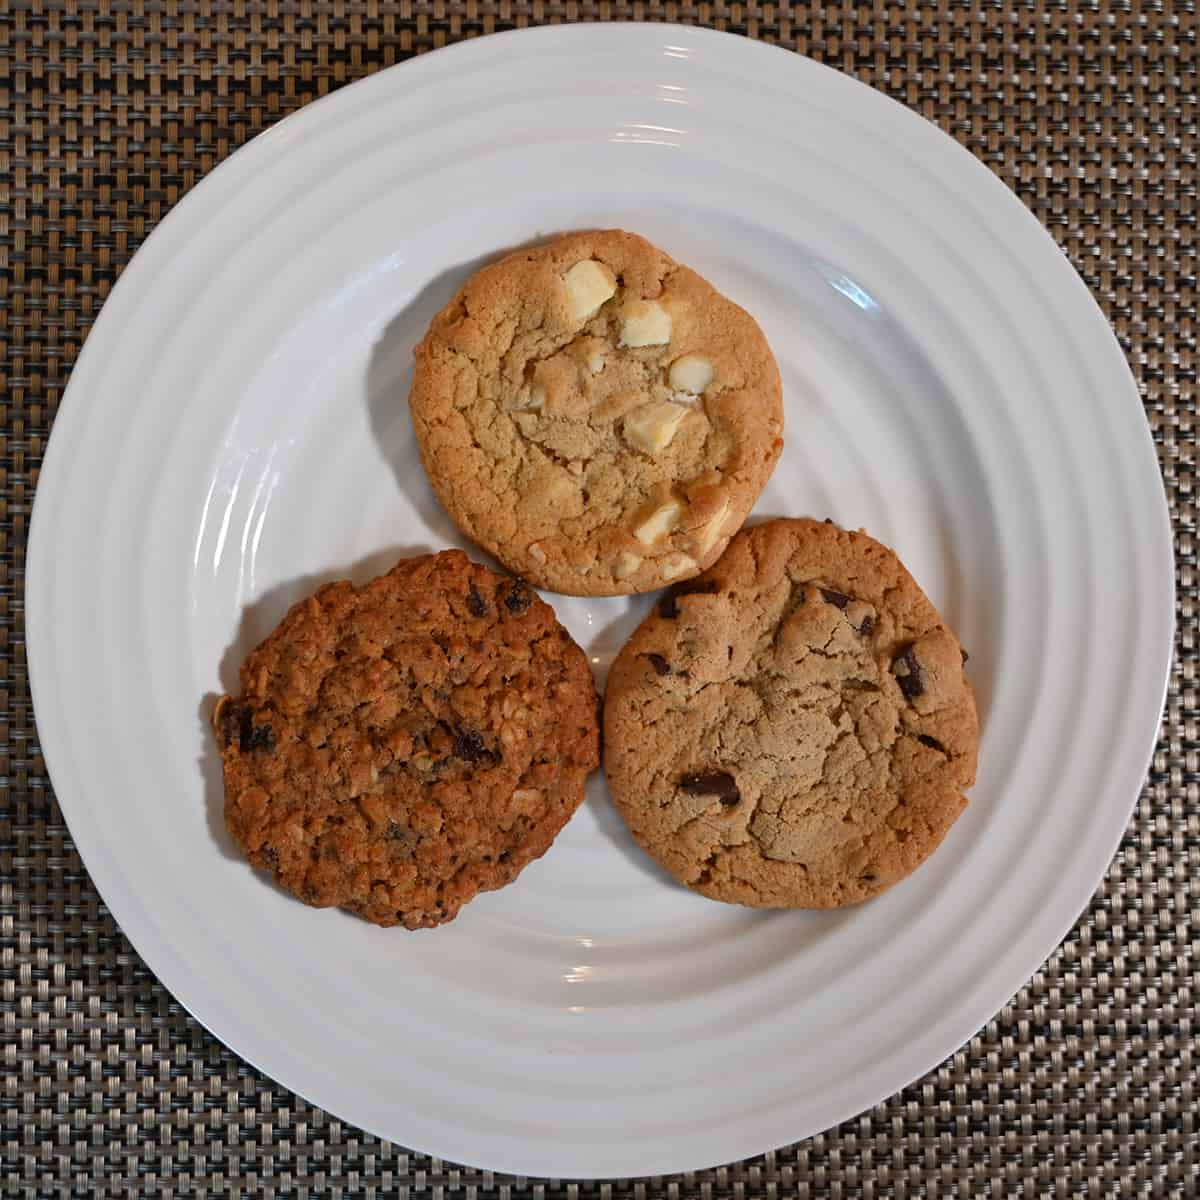 Top down image of all three kinds of cookies from the pack served on a white plate.